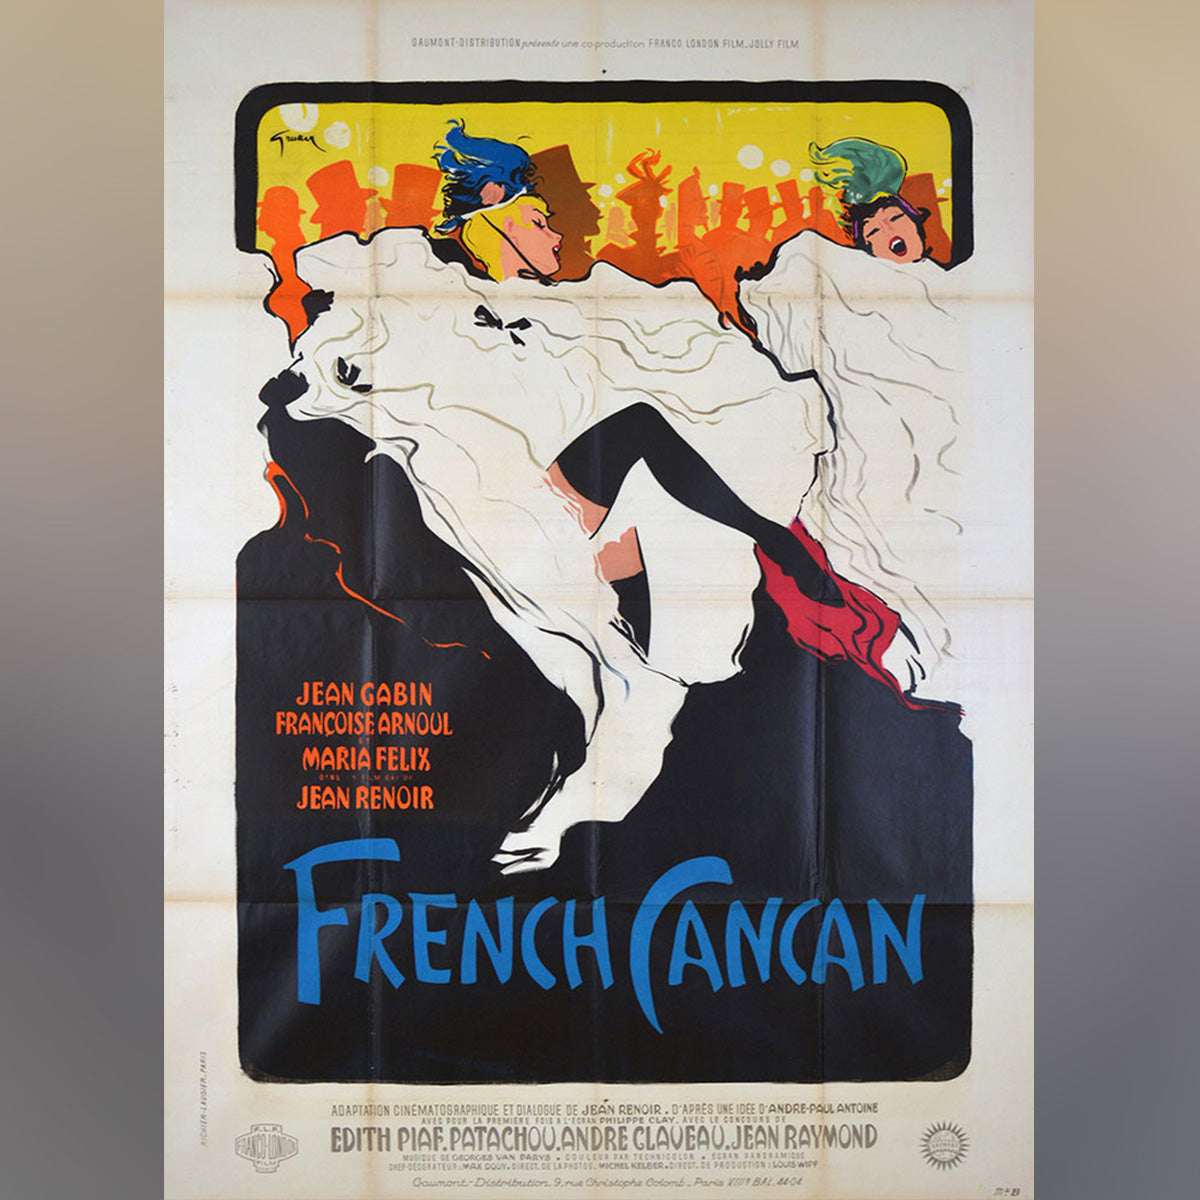 Original Movie Poster of French Cancan (1955)